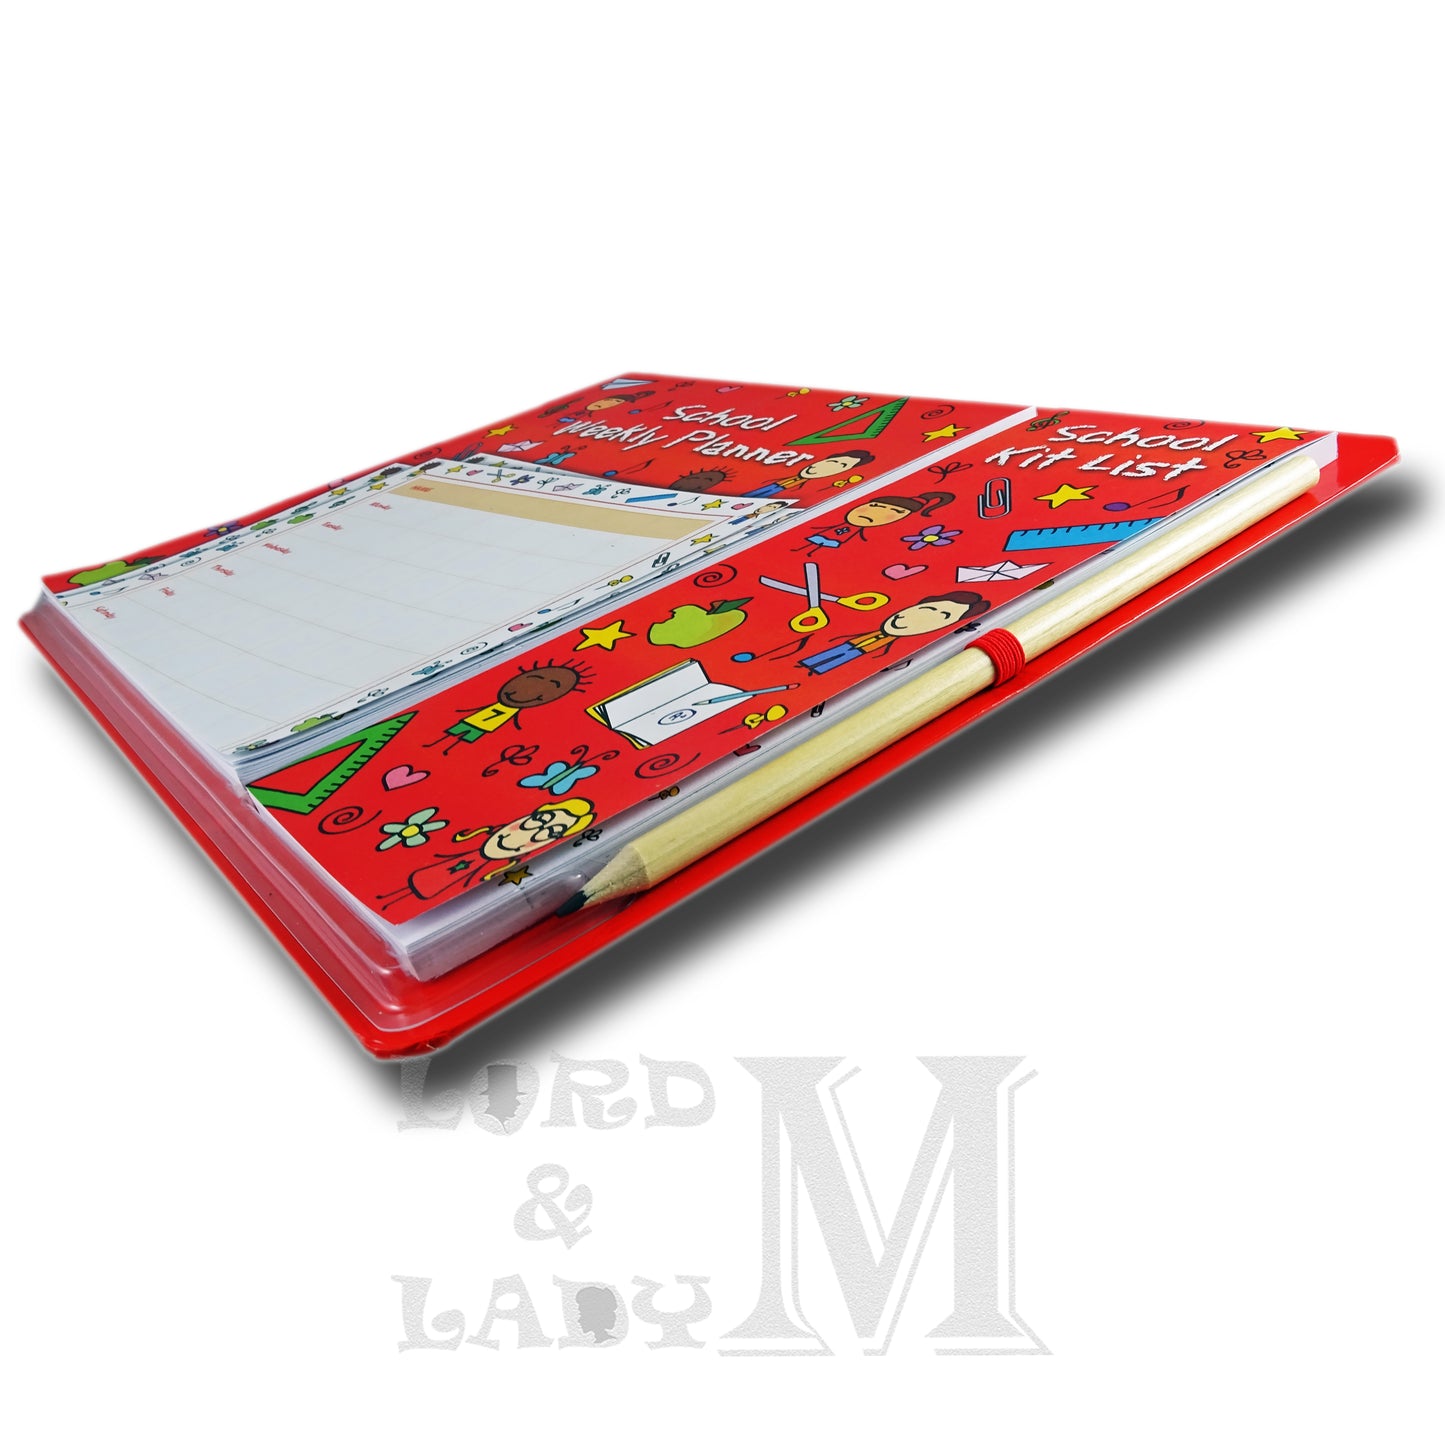 School Magnetic Weekly Planner And Kit List - Perfect Gift Idea